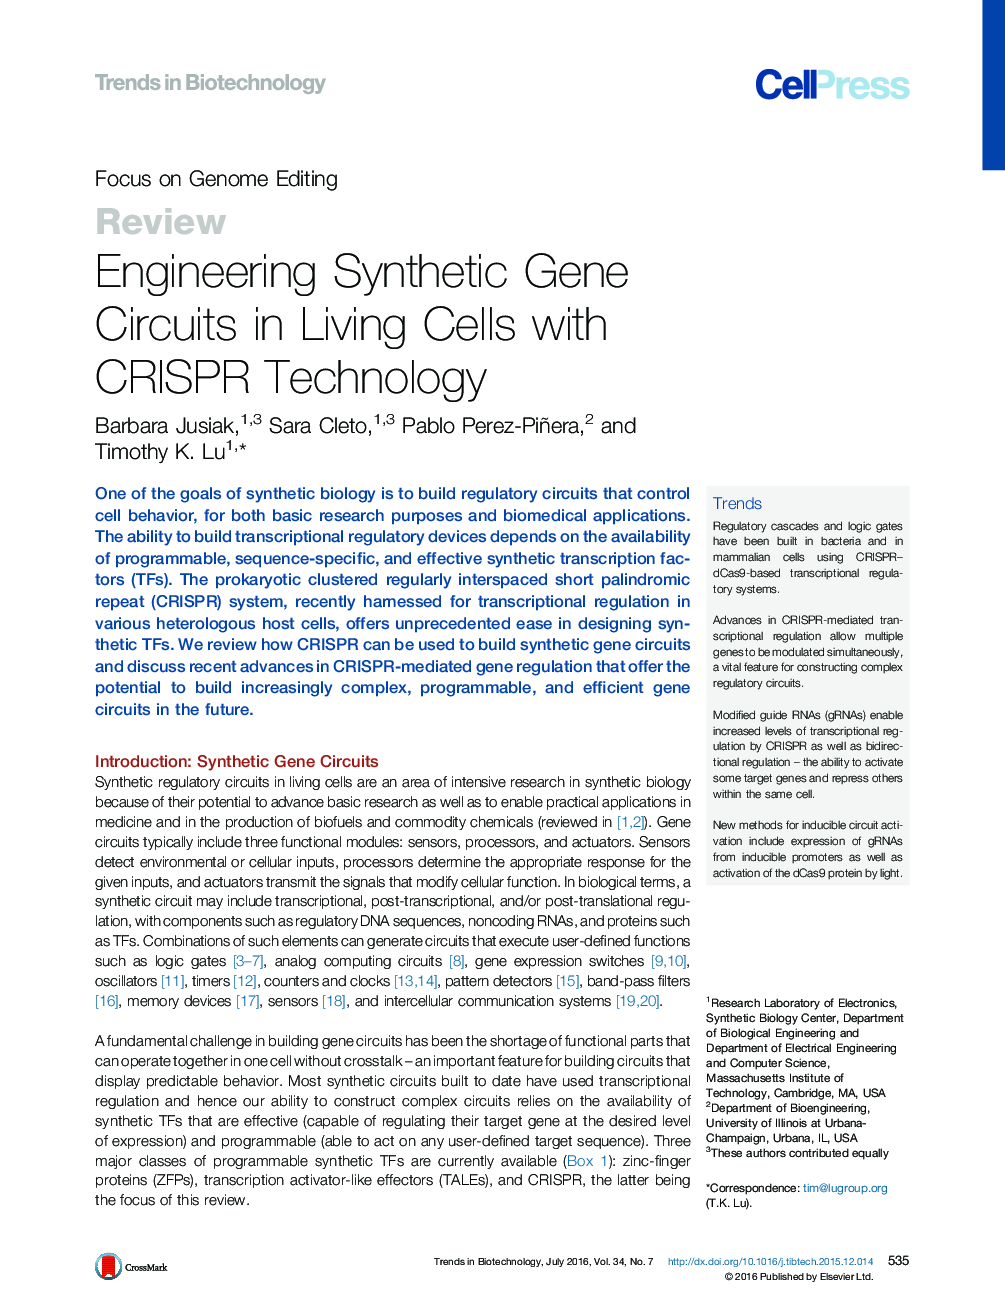 Engineering Synthetic Gene Circuits in Living Cells with CRISPR Technology